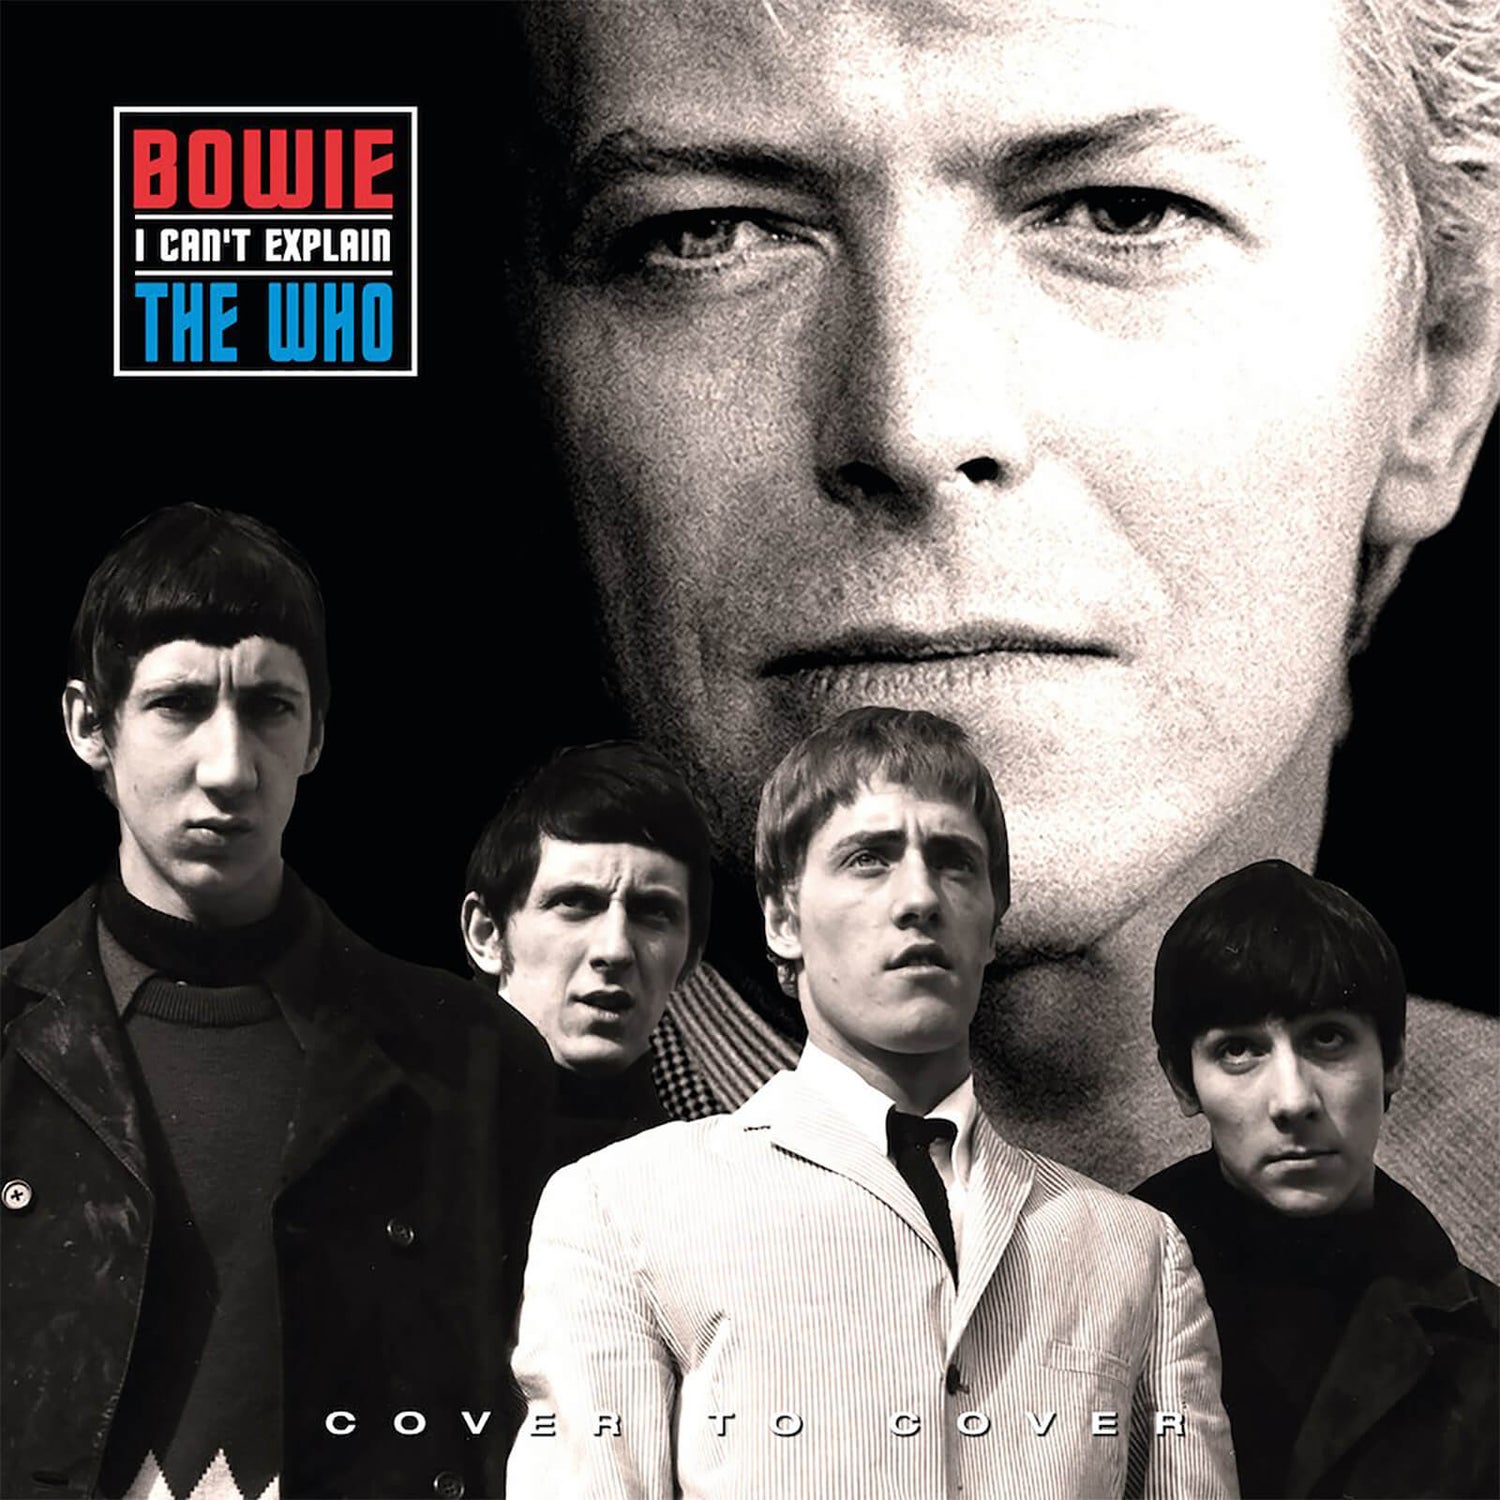 David Bowie / The Who - I Can't Explain (Red Vinyl) 7"